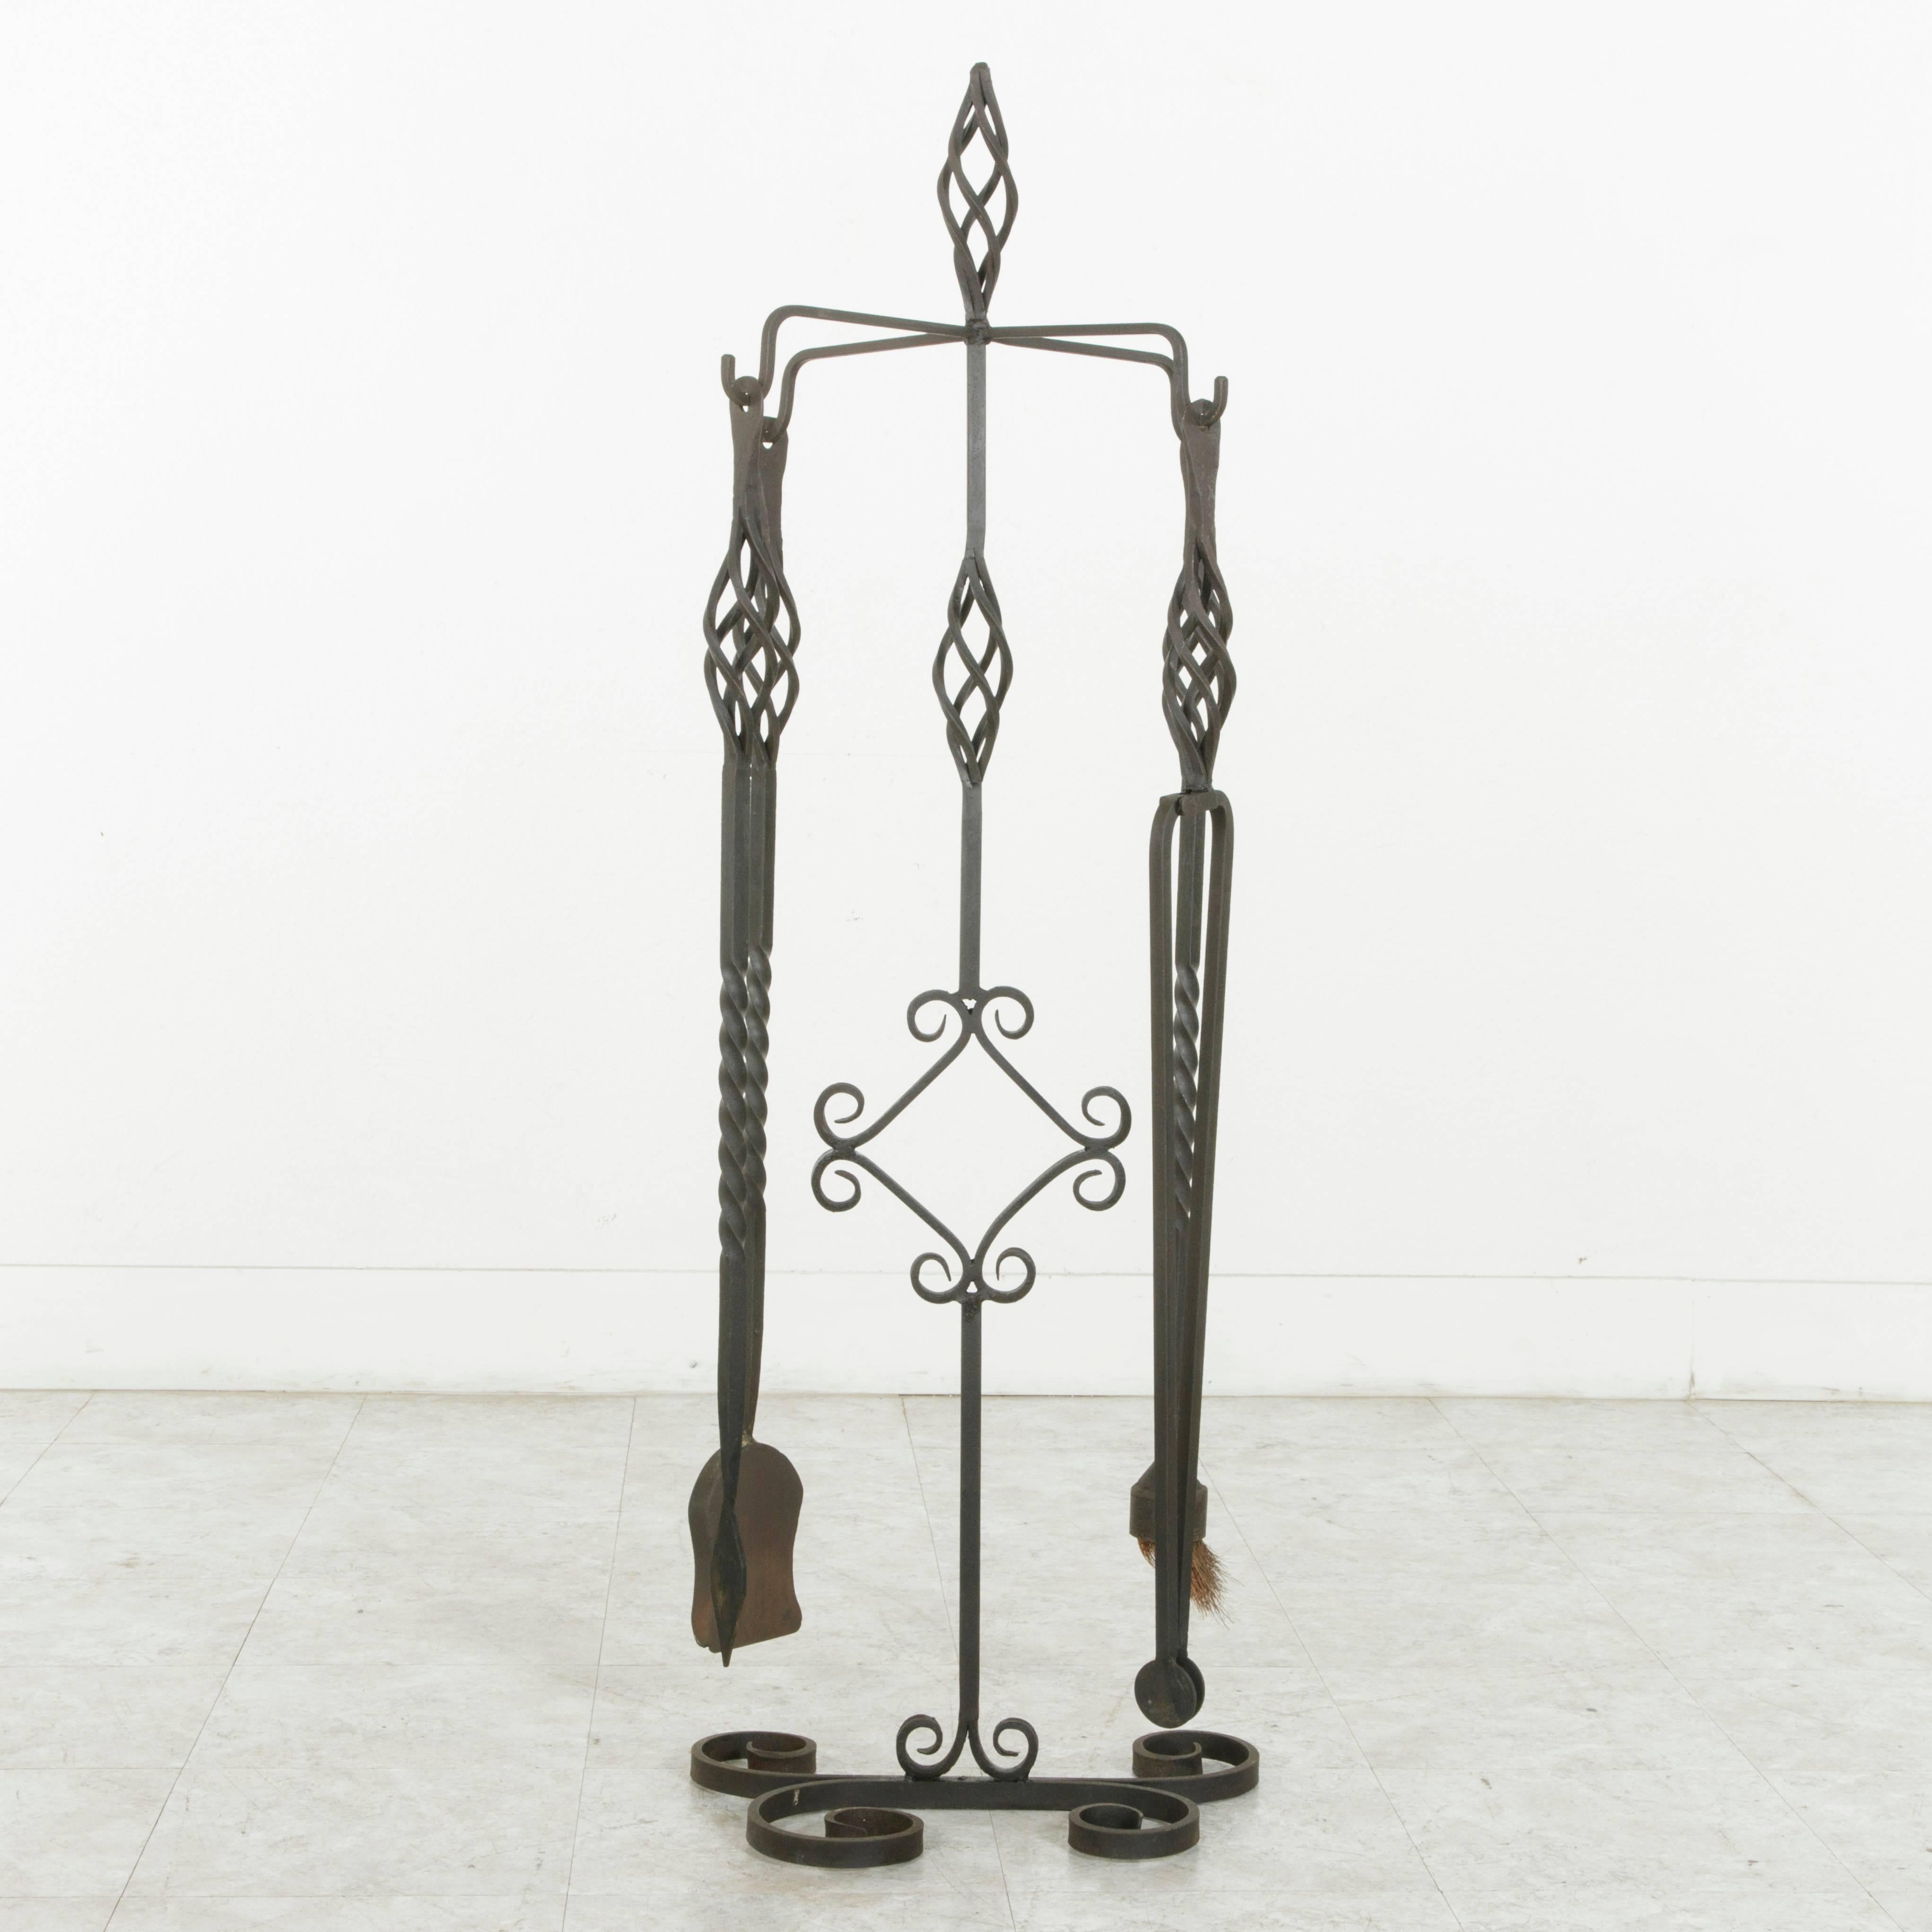 This artisan-made set of large hand forged iron fireplace tools was originally used at the massive stone fireplace of a French castle in Normandy, France.  Standing at an impressive height of 51 inches, the four tools include a poker, shovel, tongs,